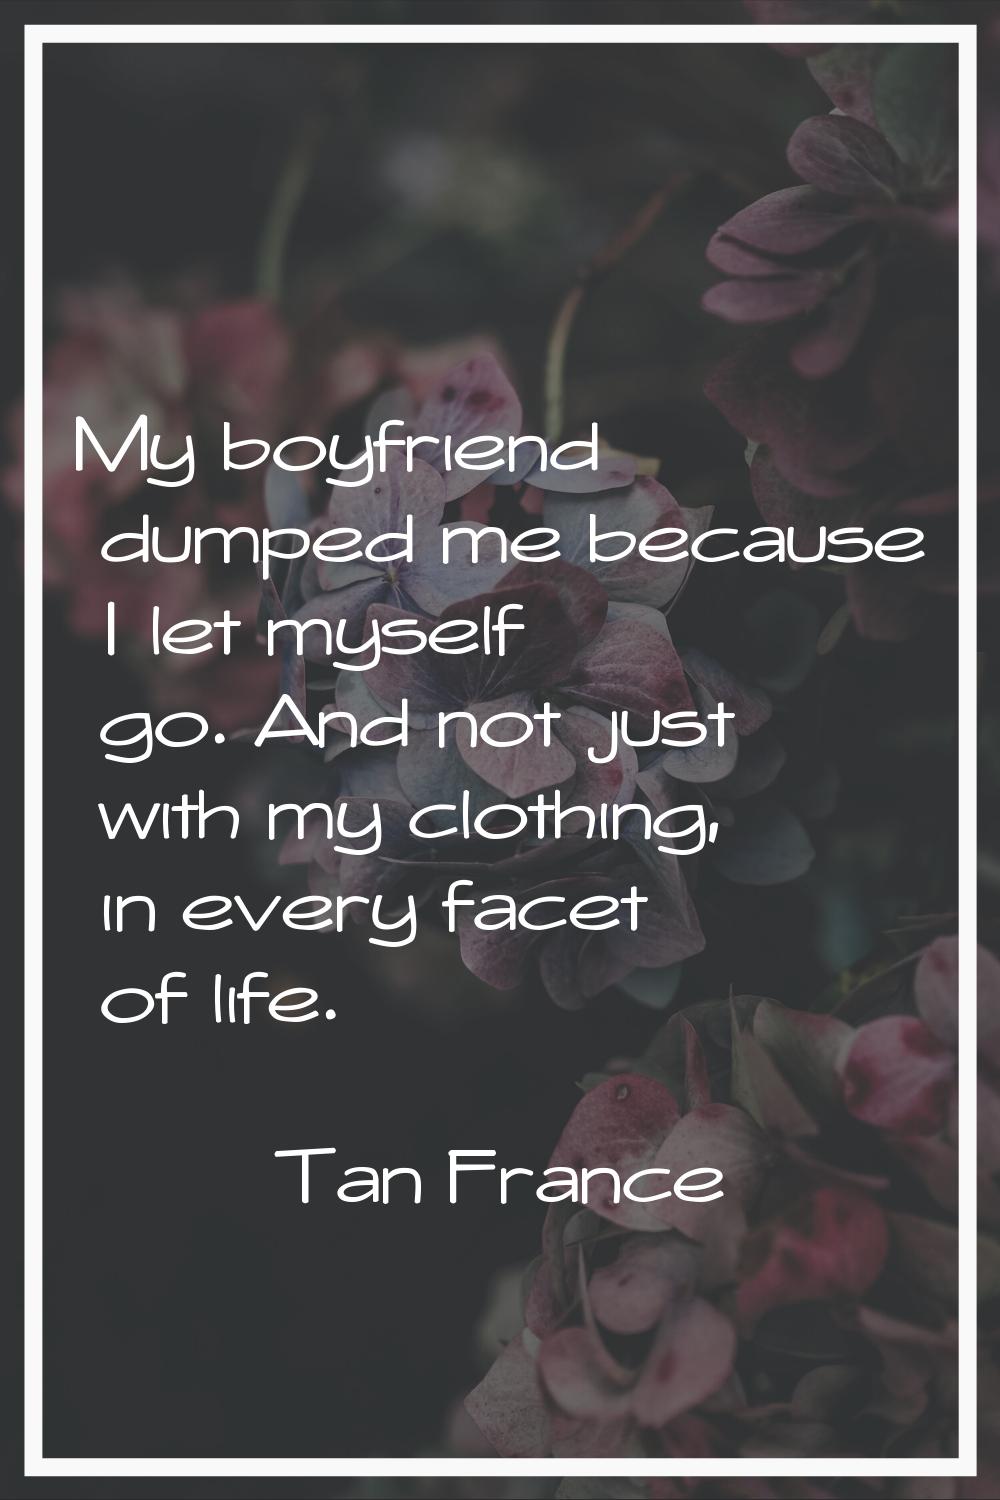 My boyfriend dumped me because I let myself go. And not just with my clothing, in every facet of li